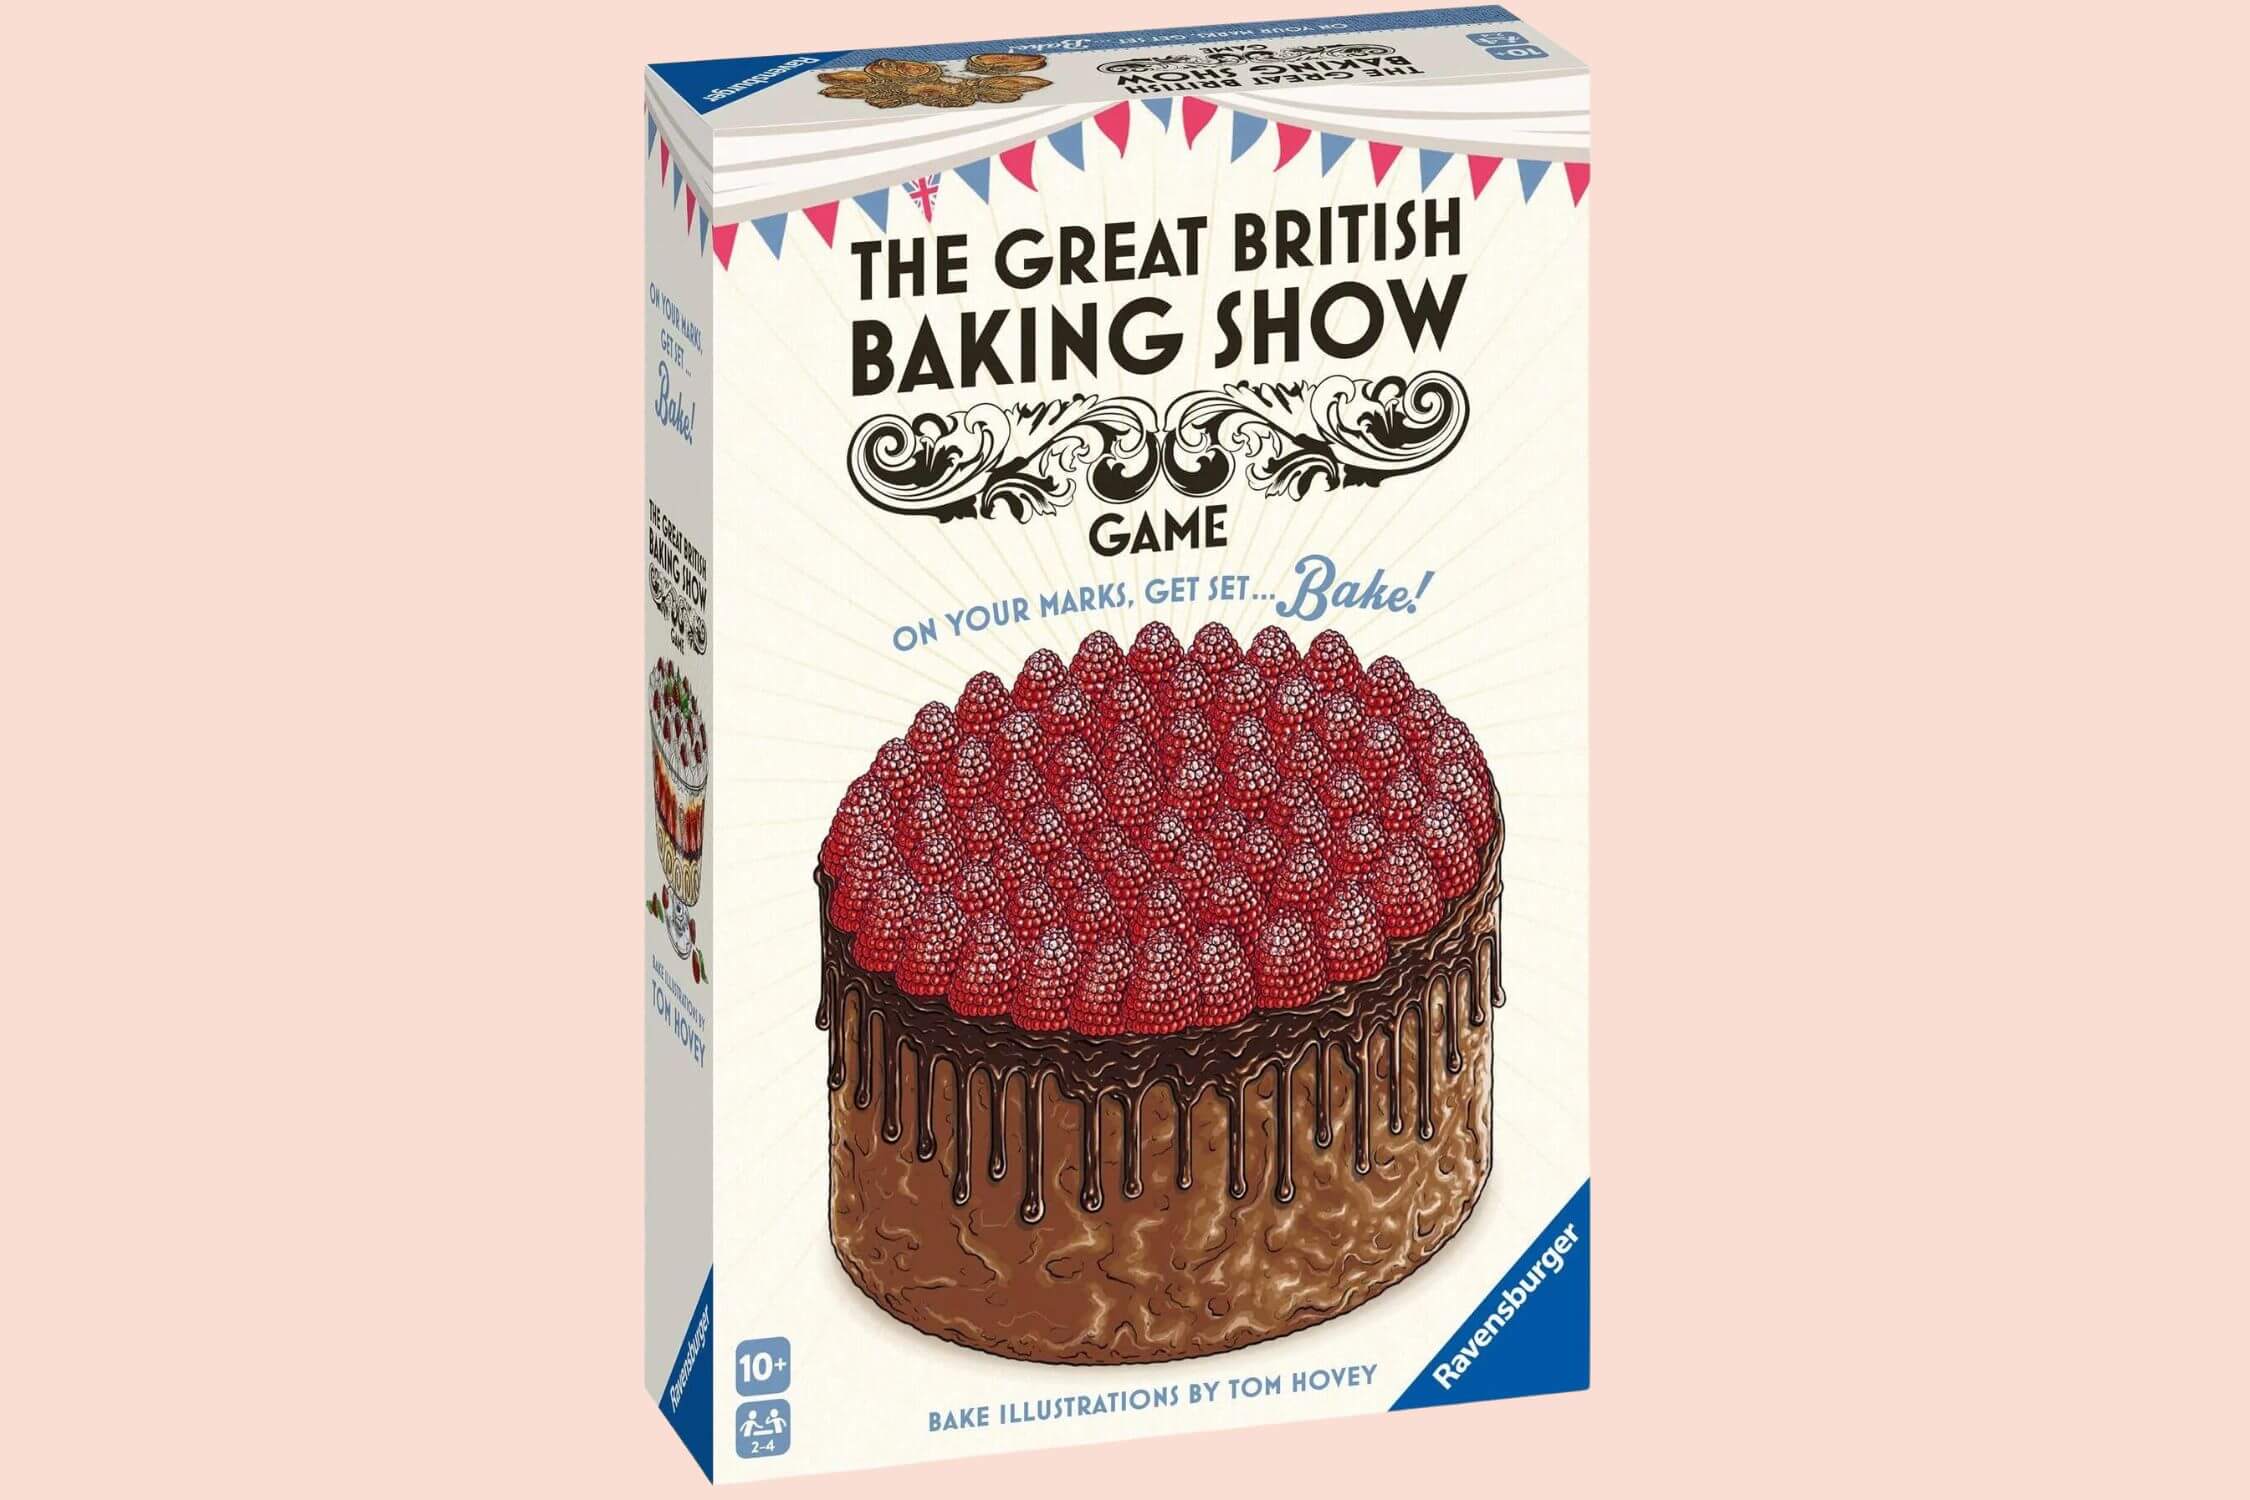 The Great British Baking Show - Build a masterpiece of a dessert